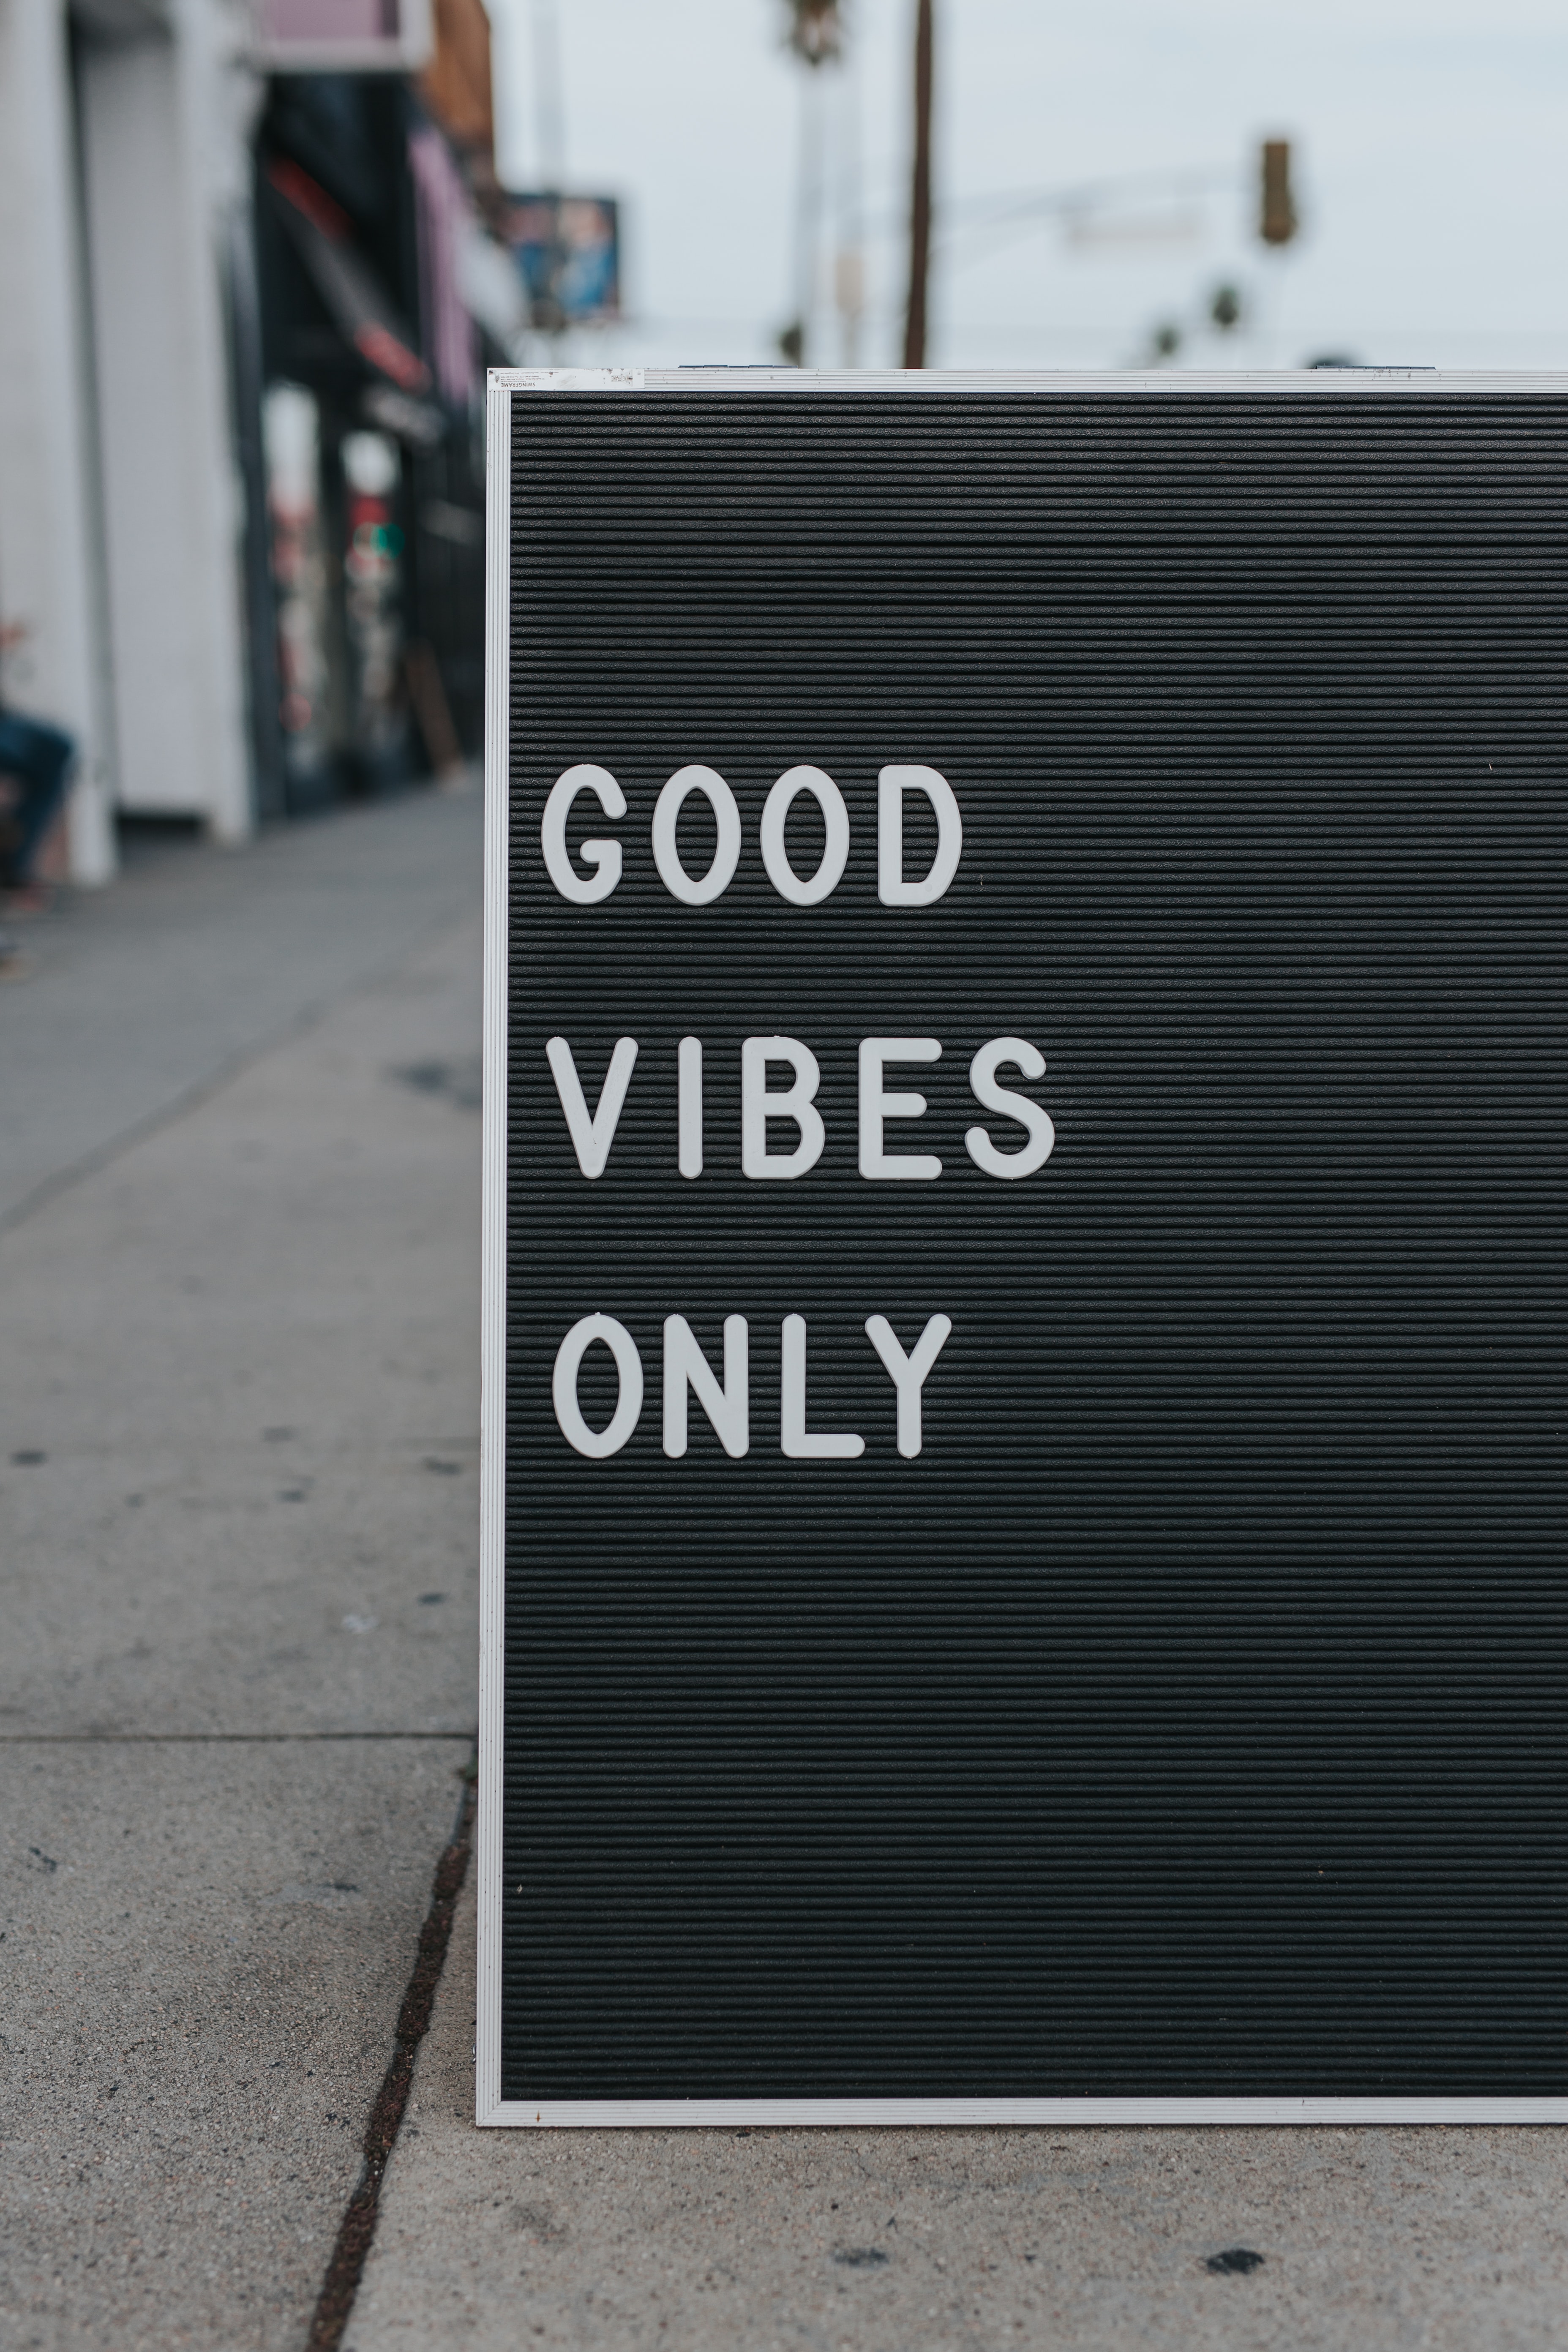 Good vibes from your personal brand